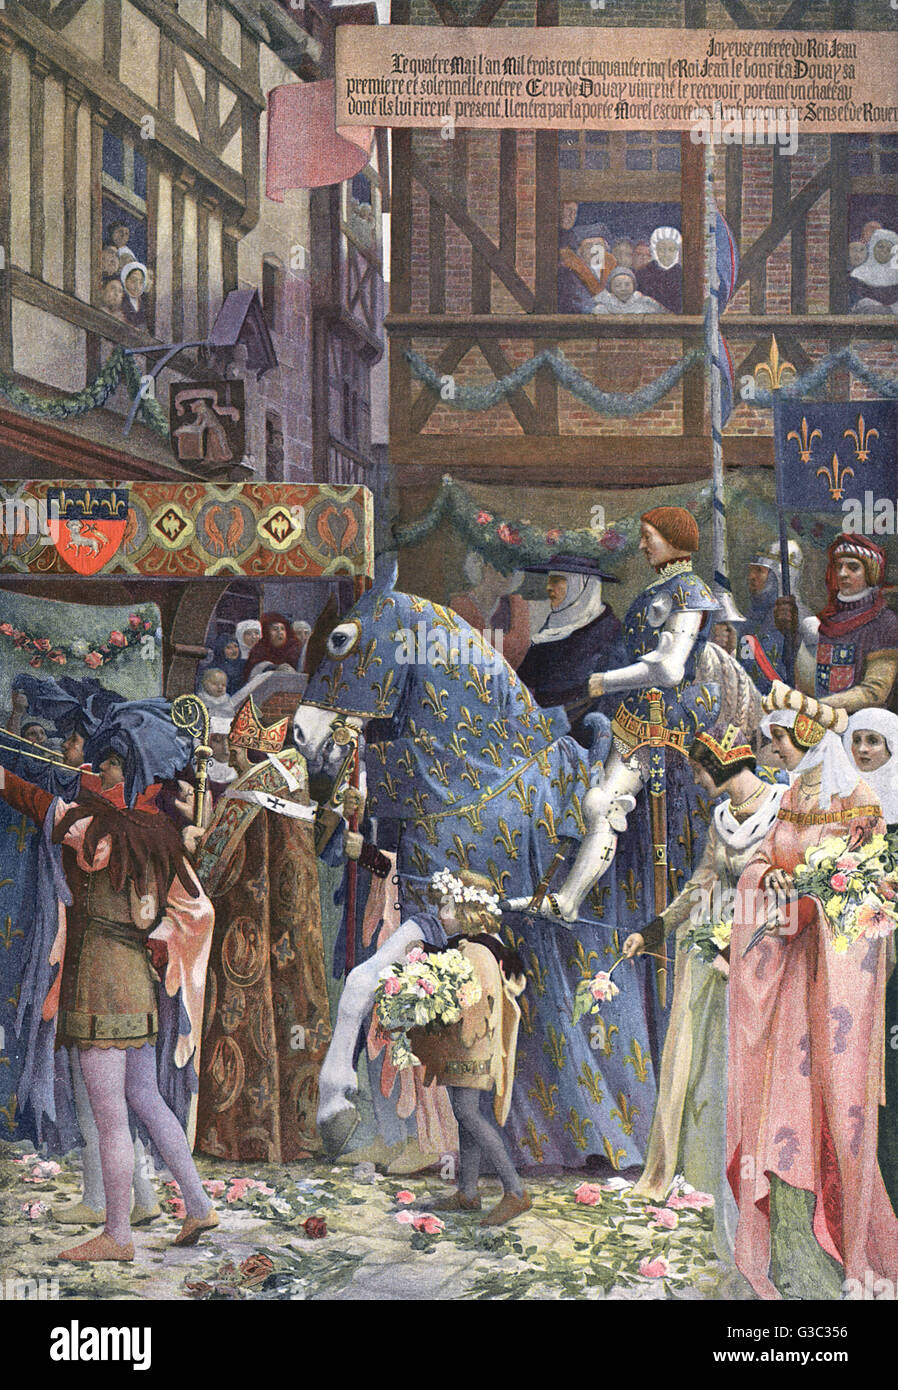 Joyous Entry of King John the Good at Douai, 1355. Part of a panoramic painting by Auguste Fran&#x7be9;s-Marie Gorguet (1862-1927) which he painted between 1914 and 1916.     Date: 1355 Stock Photo